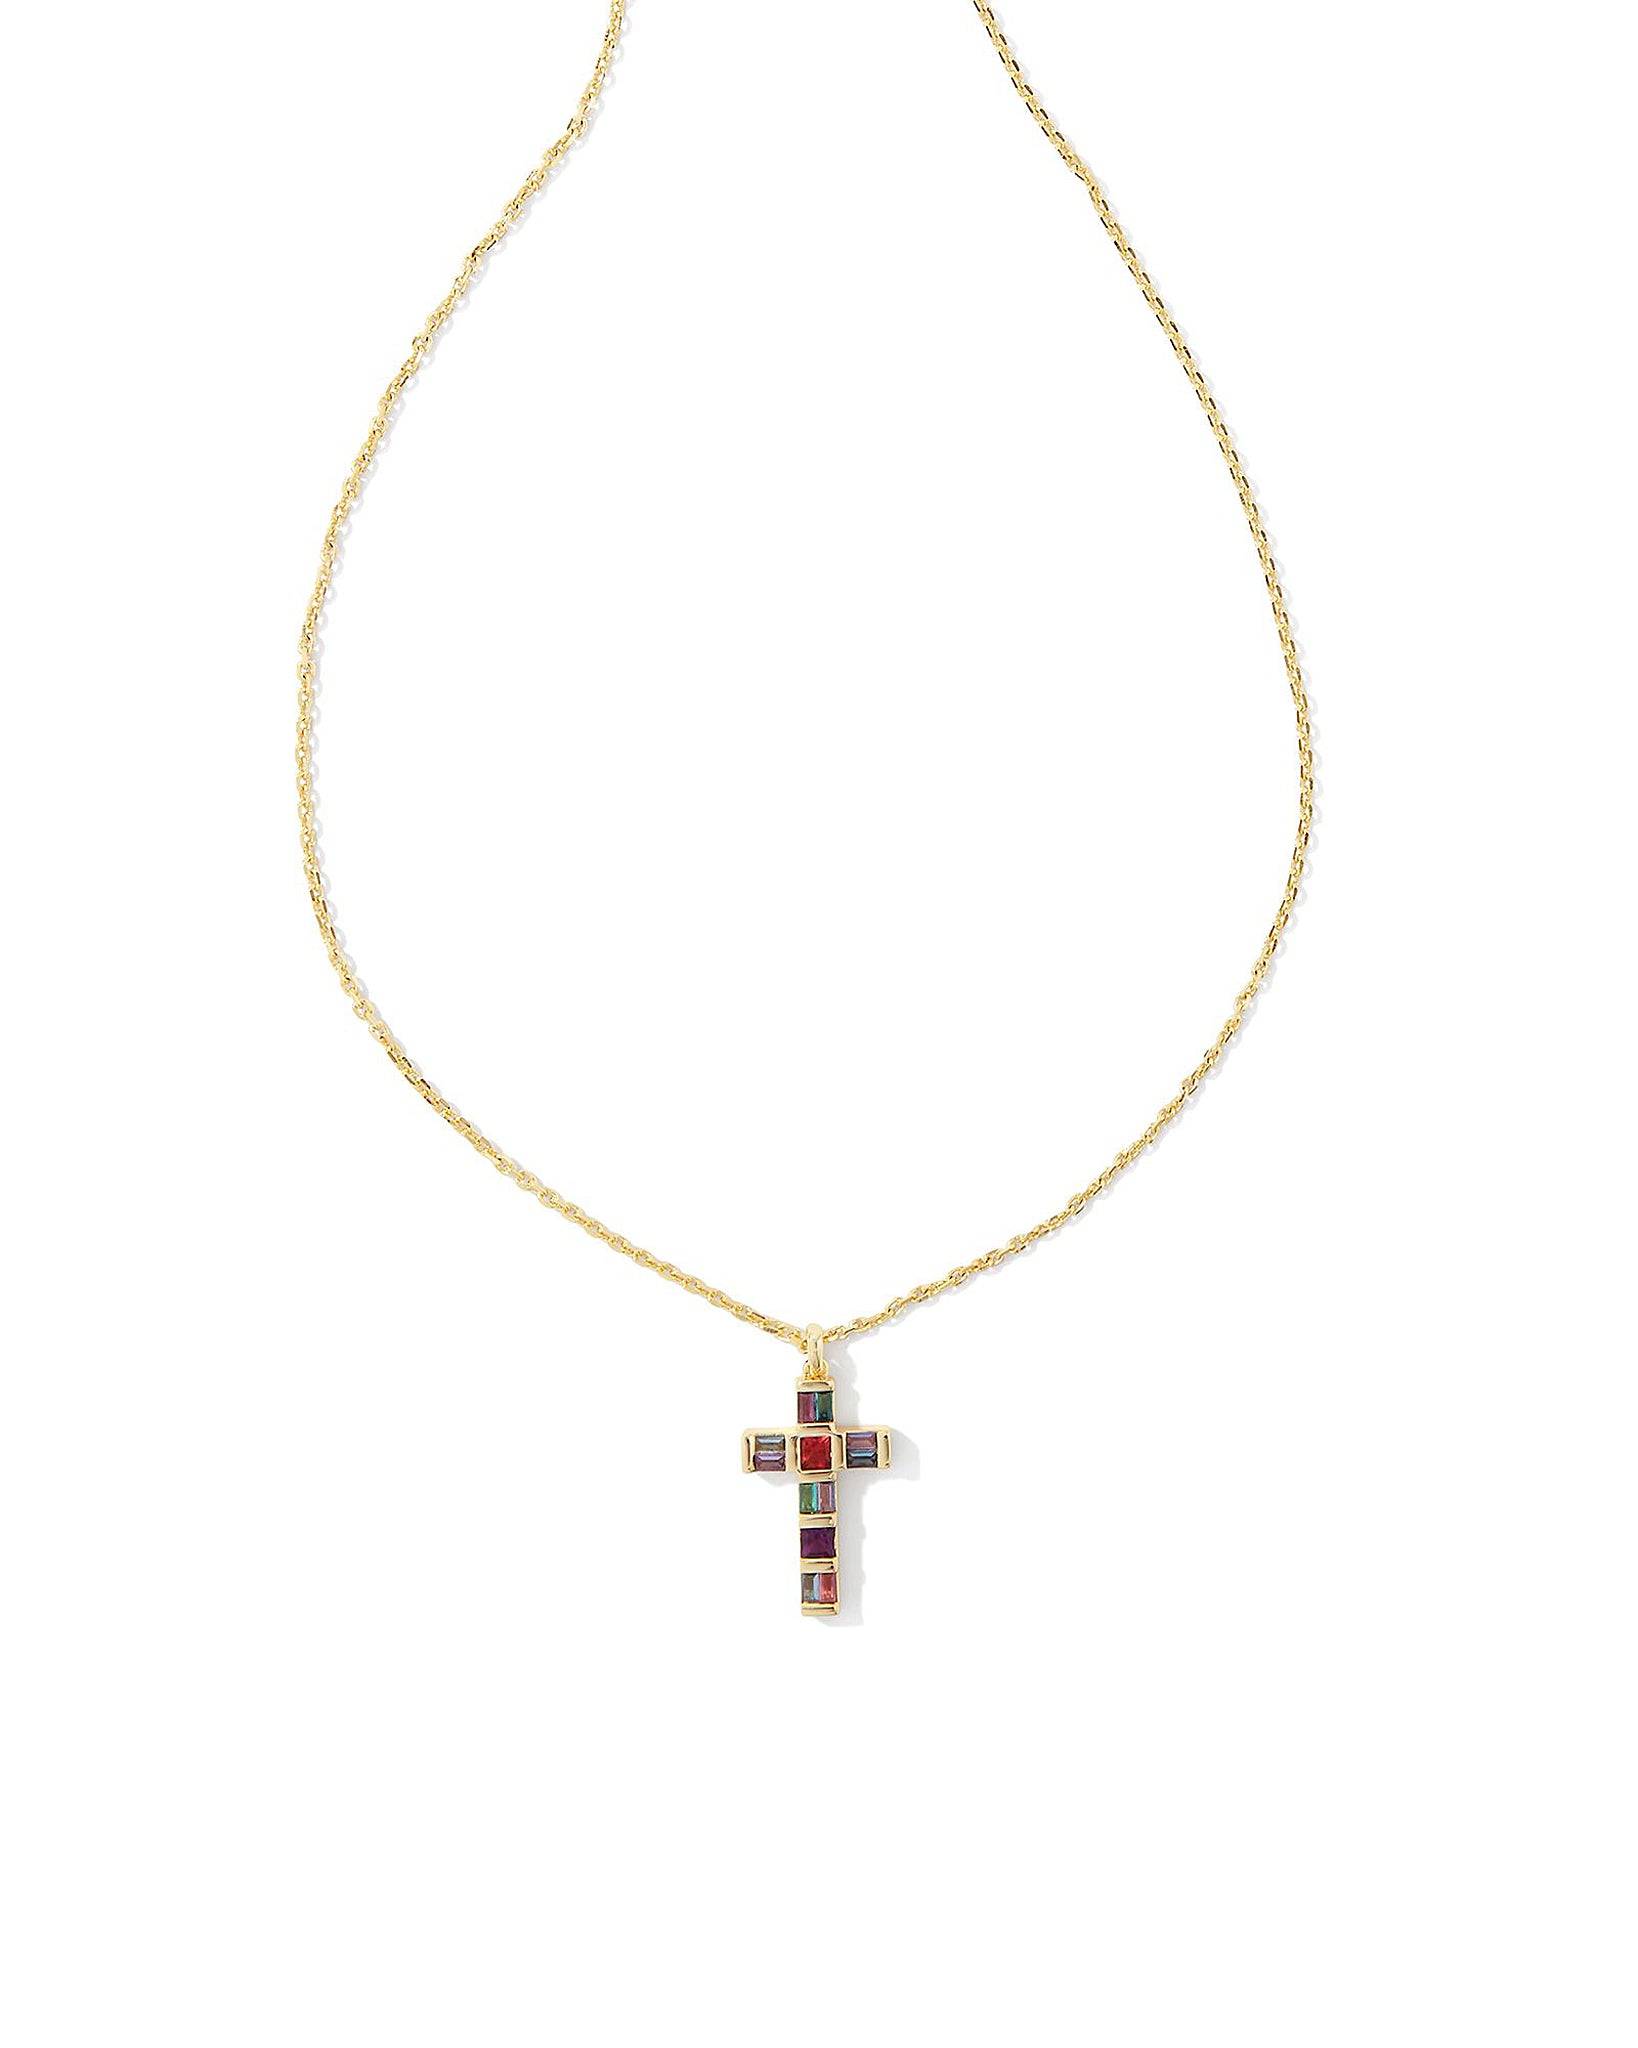 Kendra Scott Gracie Cross Pendant Necklace in Multi Mix and Gold